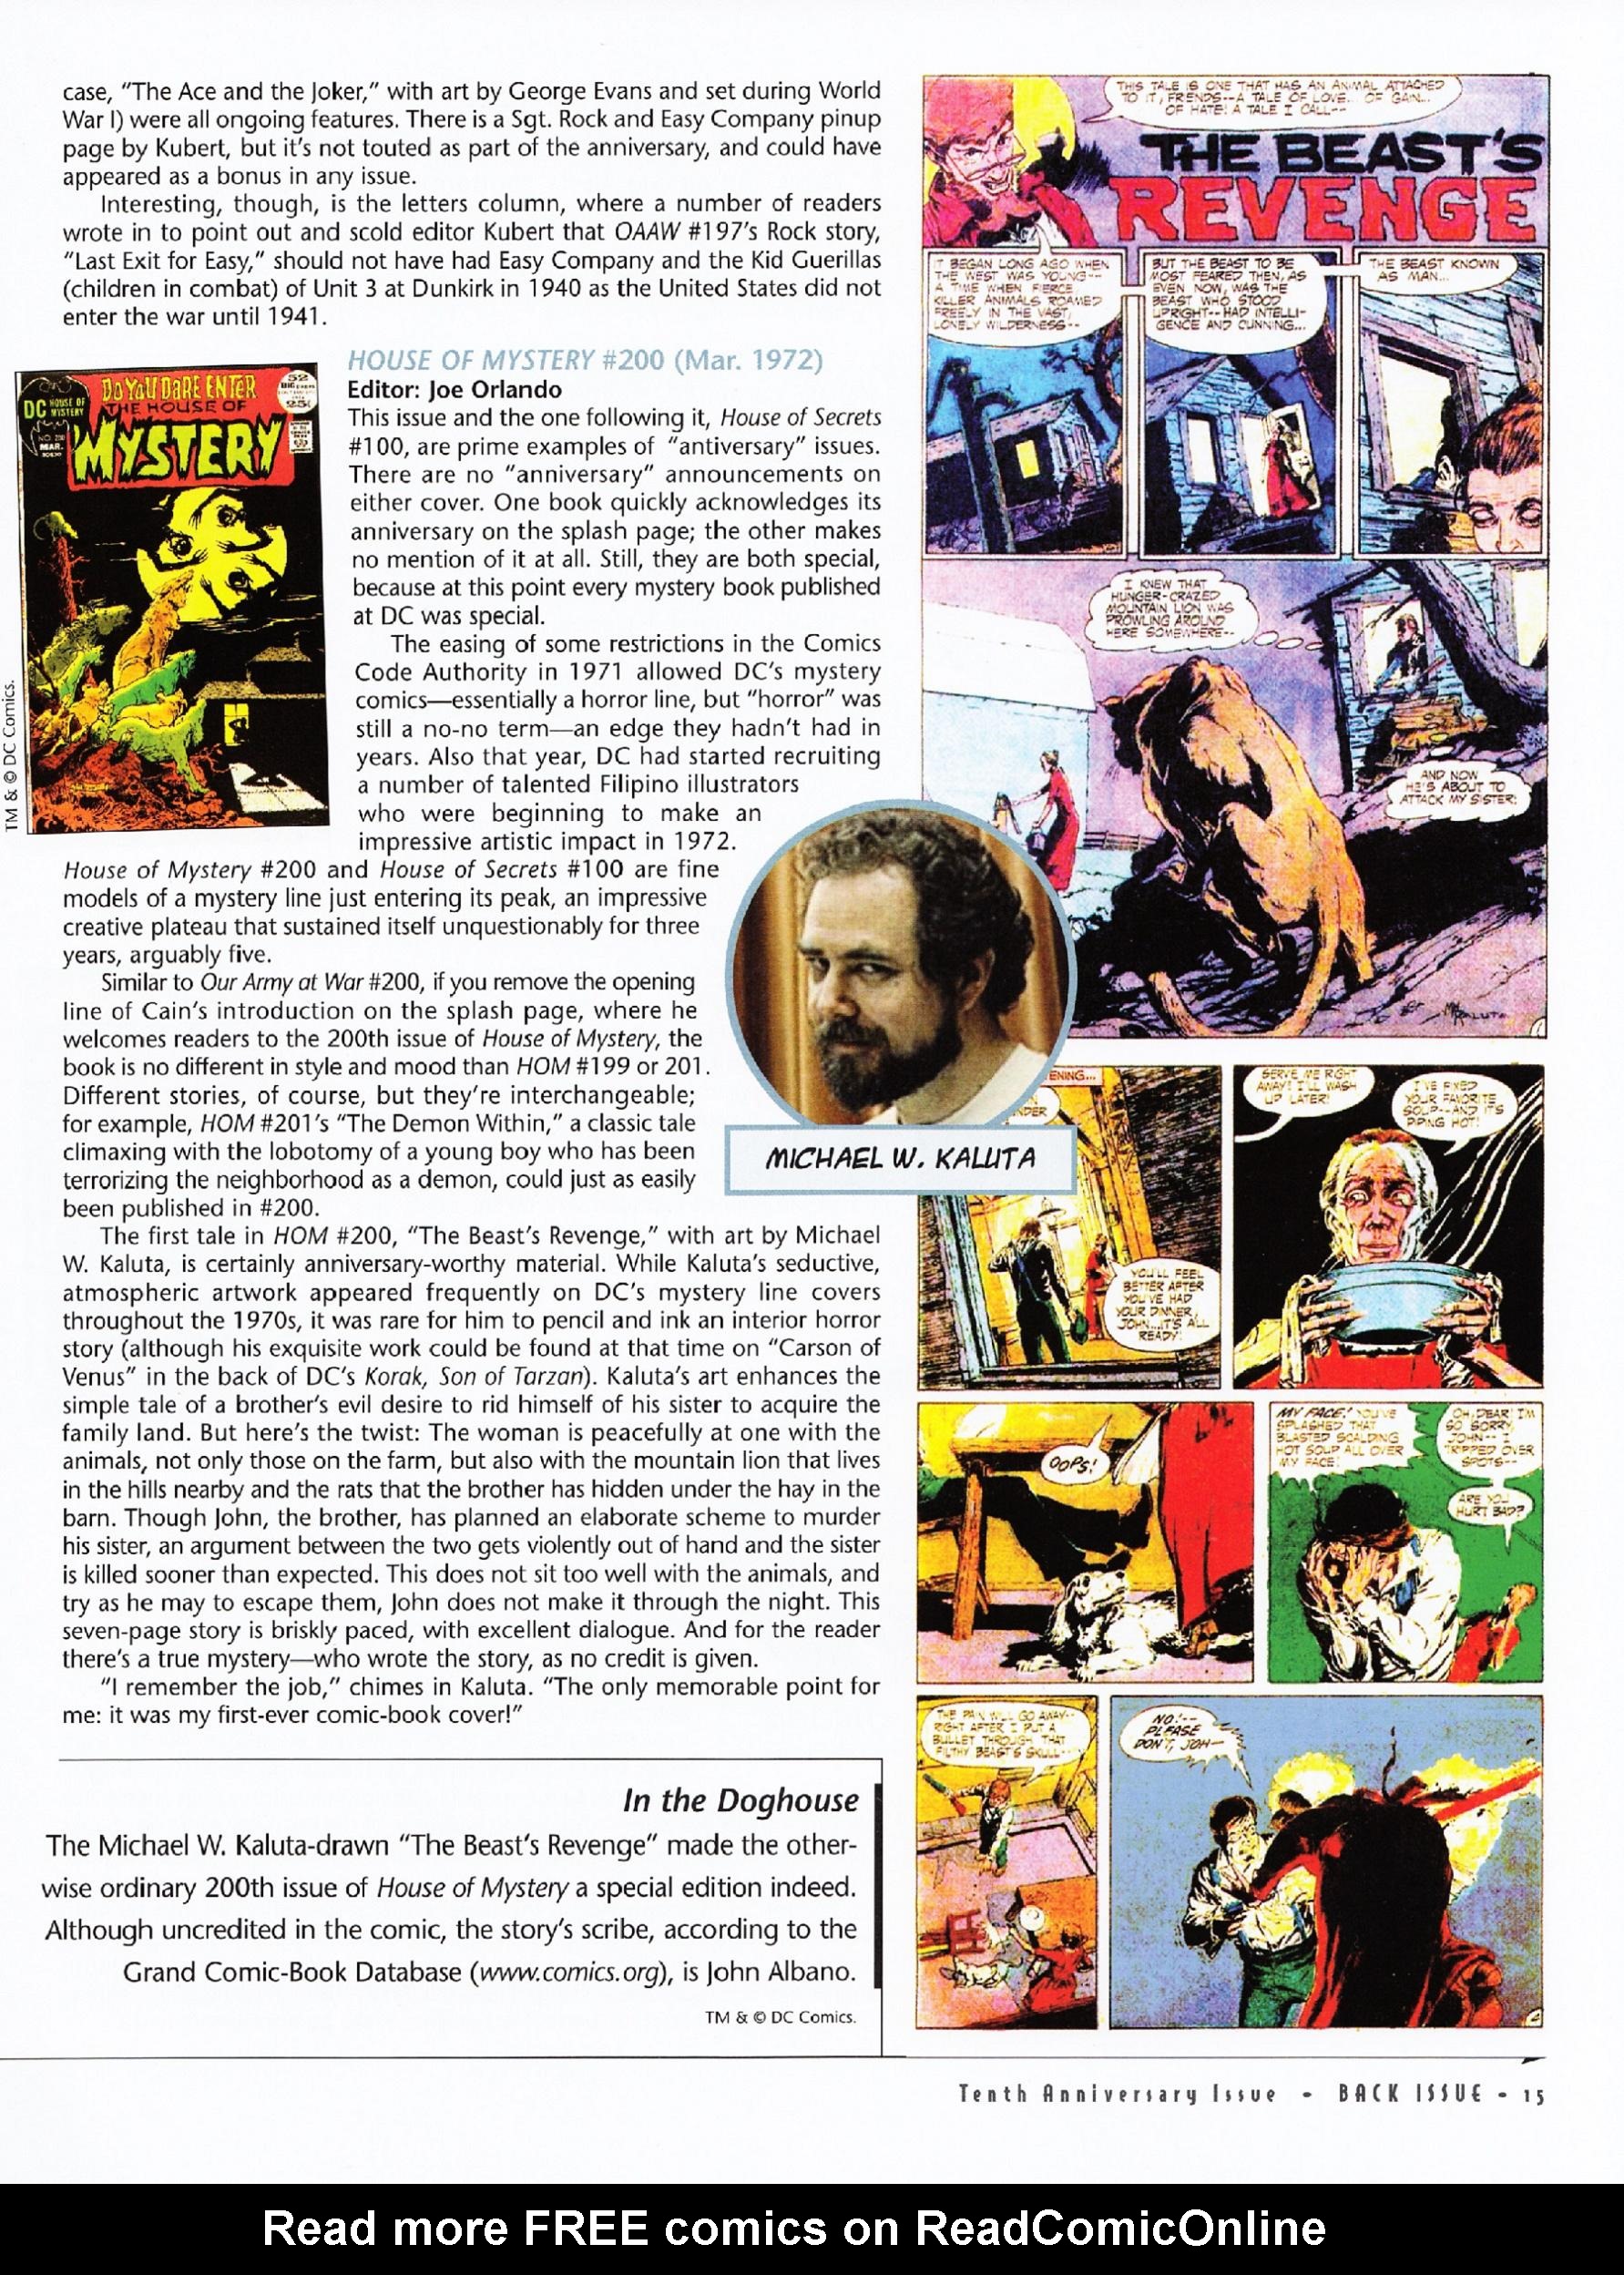 Read online Back Issue comic -  Issue #69 - 16